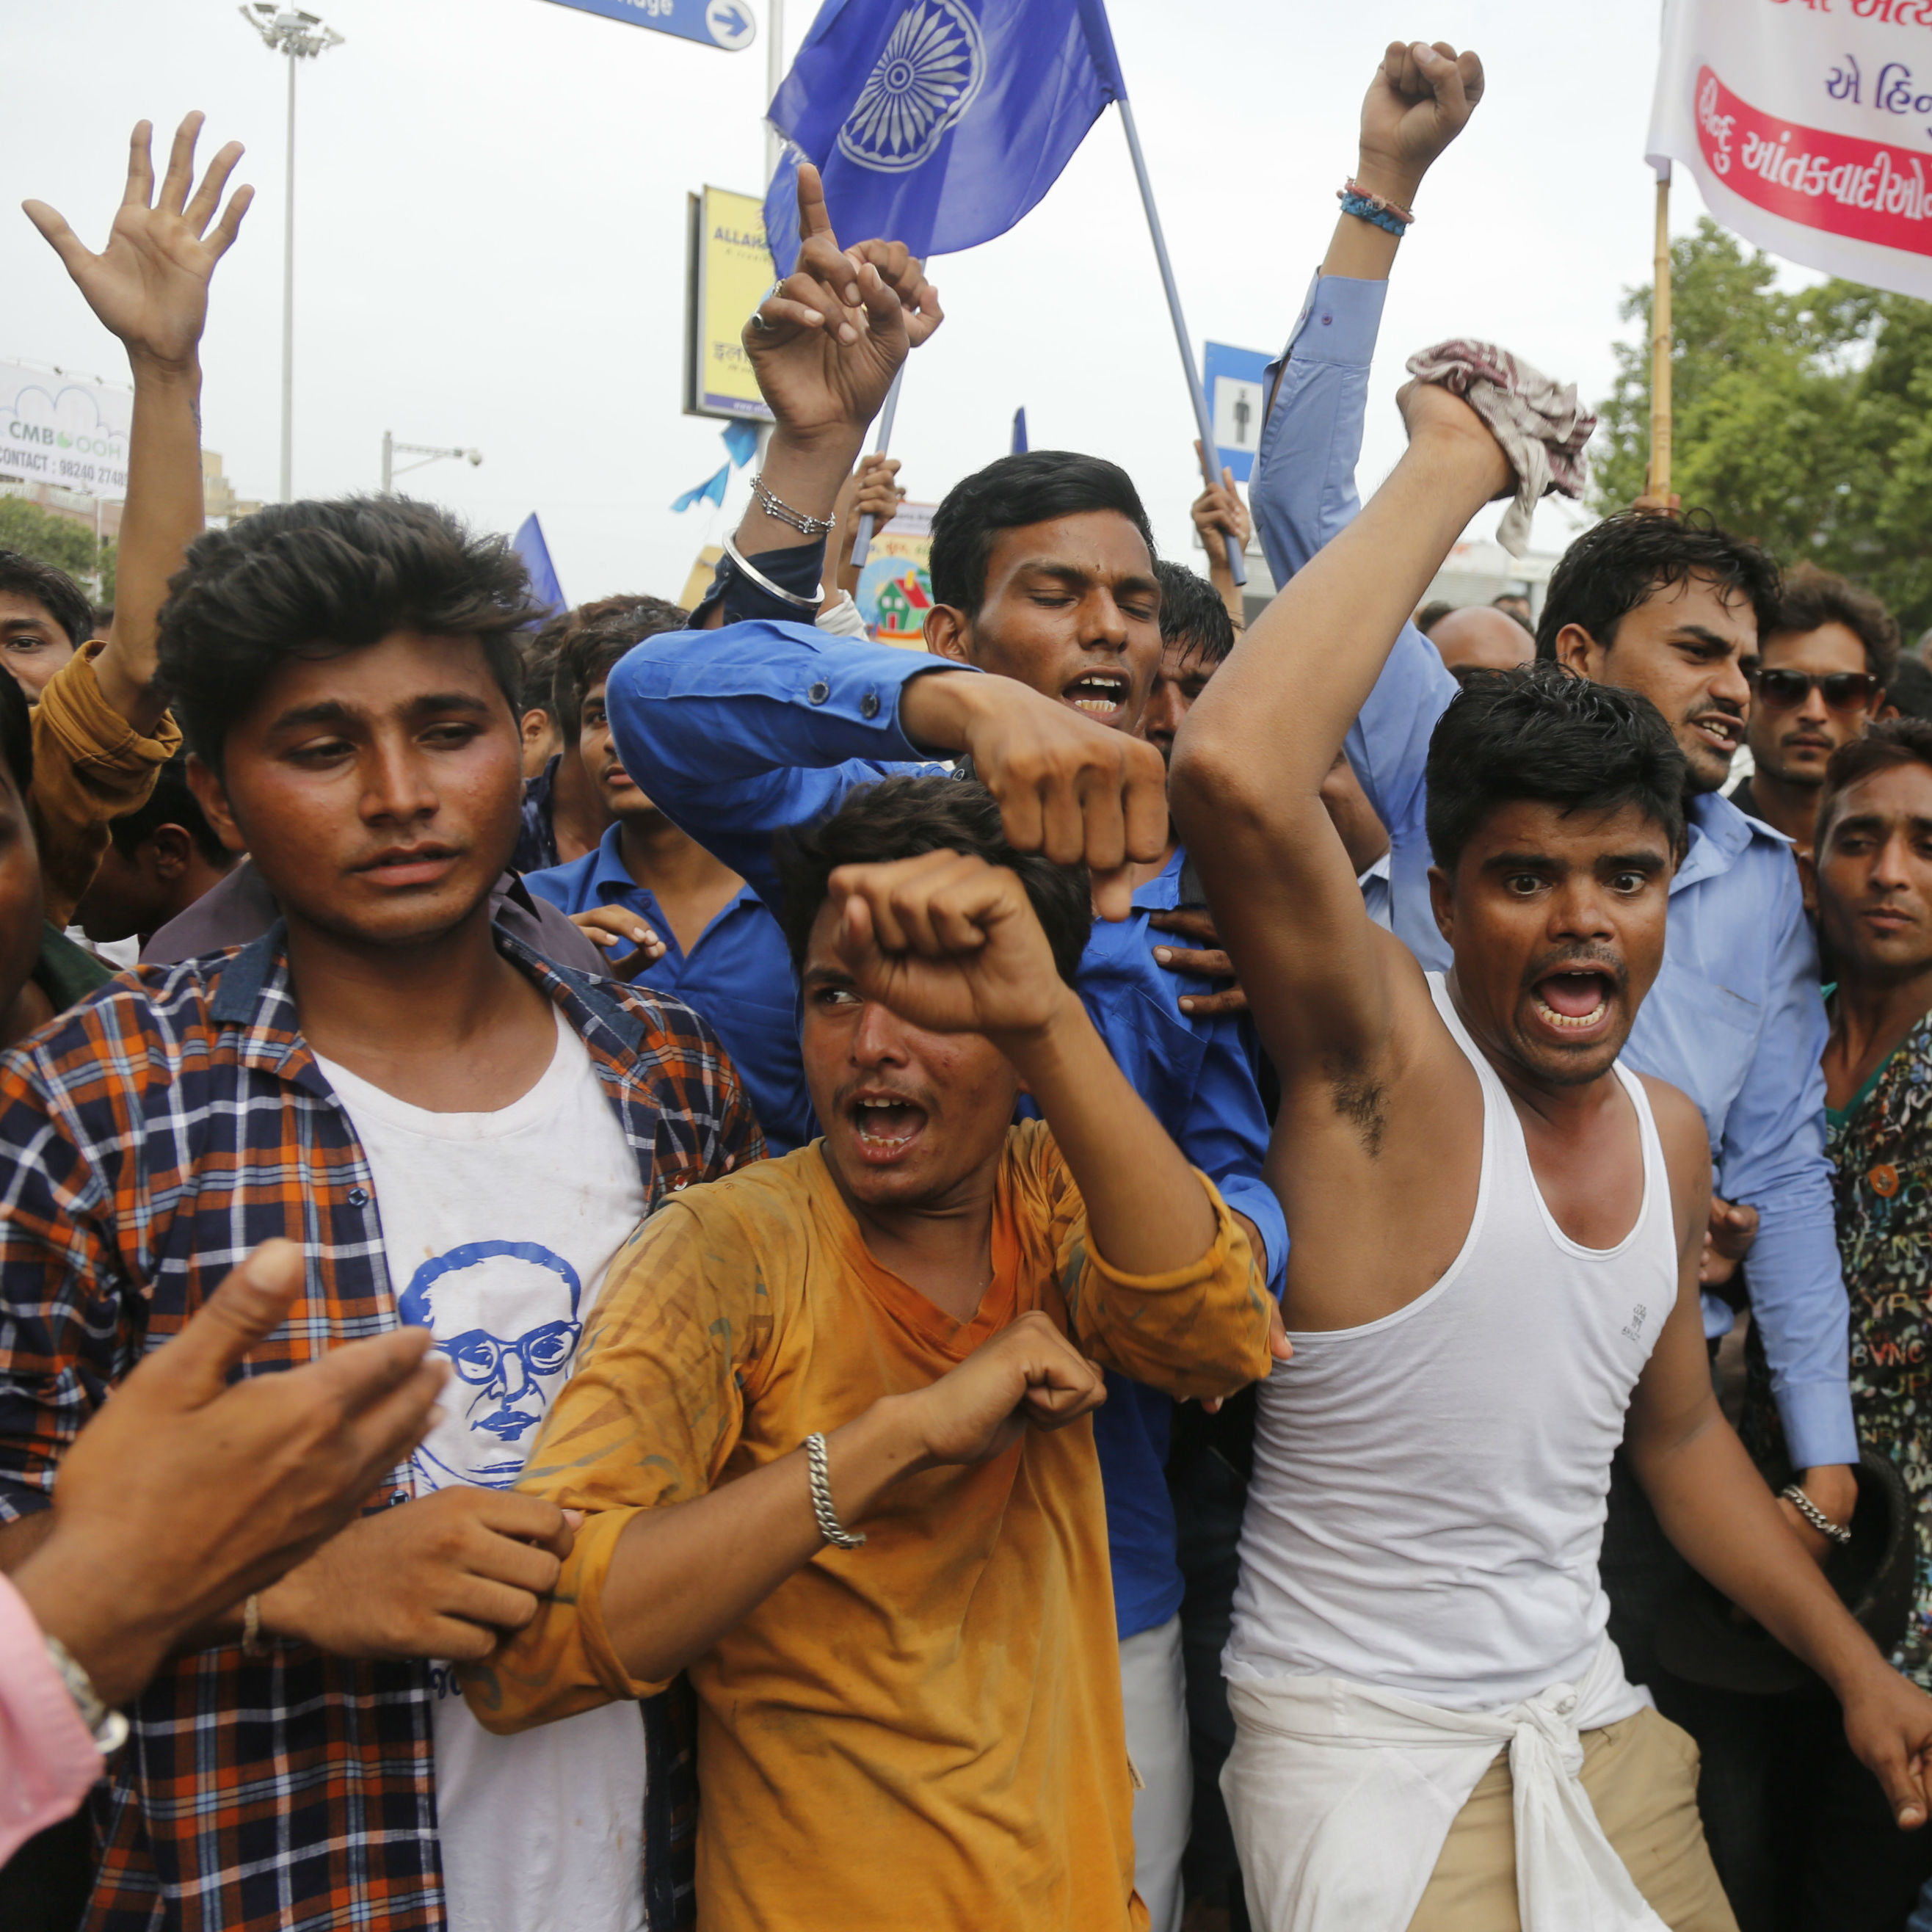 Church expresses fears for Dalits as caste conflict in India intensifies